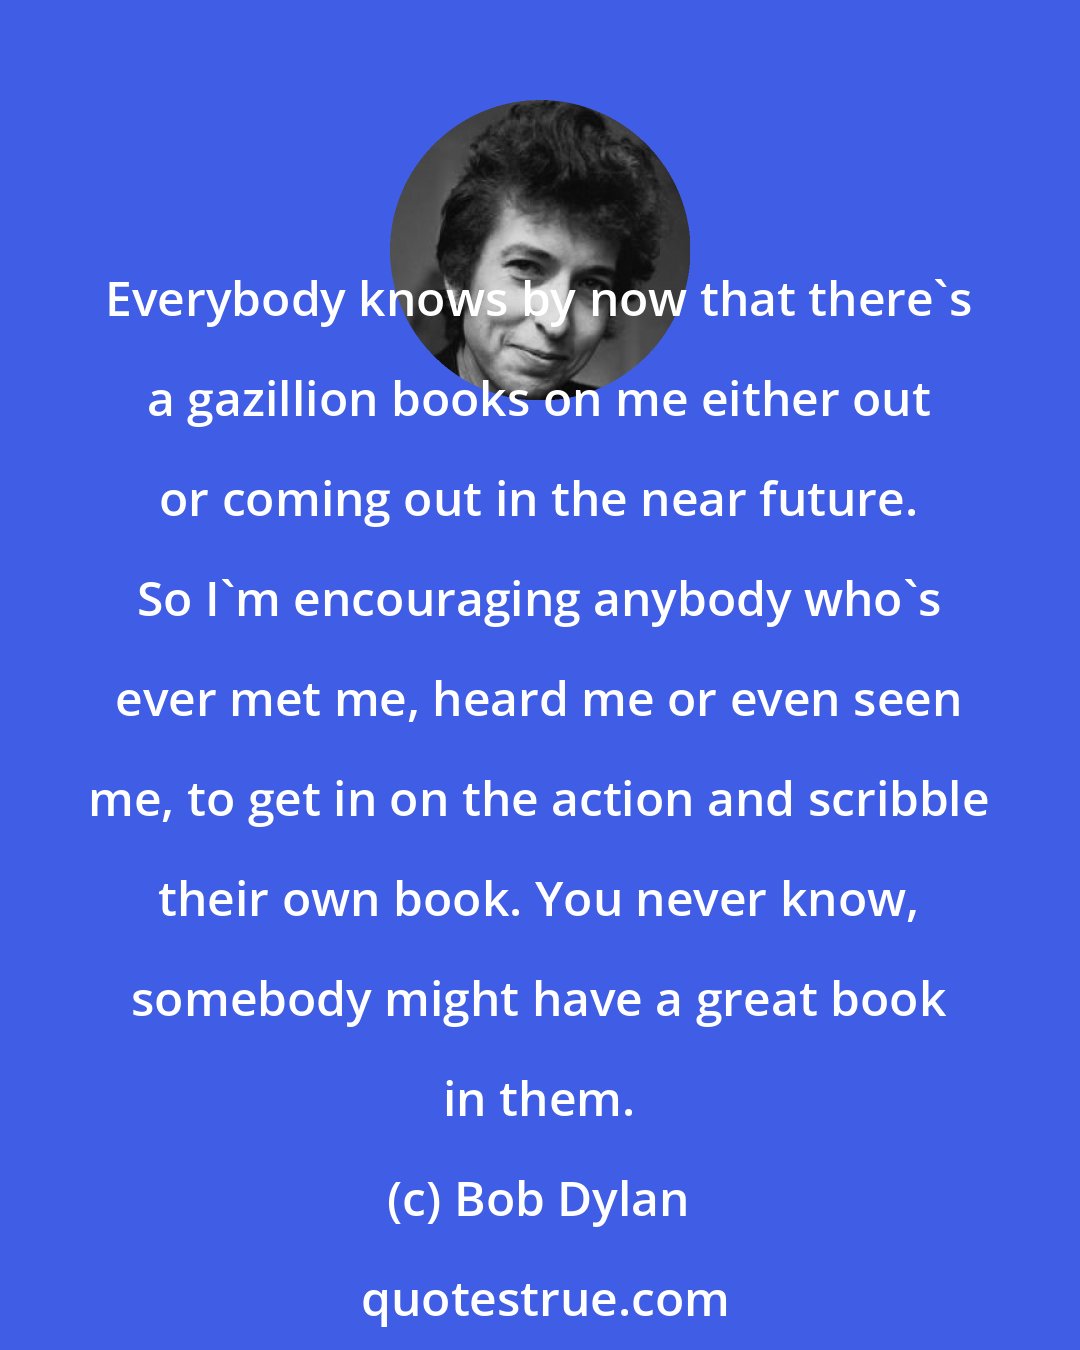 Bob Dylan: Everybody knows by now that there's a gazillion books on me either out or coming out in the near future. So I'm encouraging anybody who's ever met me, heard me or even seen me, to get in on the action and scribble their own book. You never know, somebody might have a great book in them.